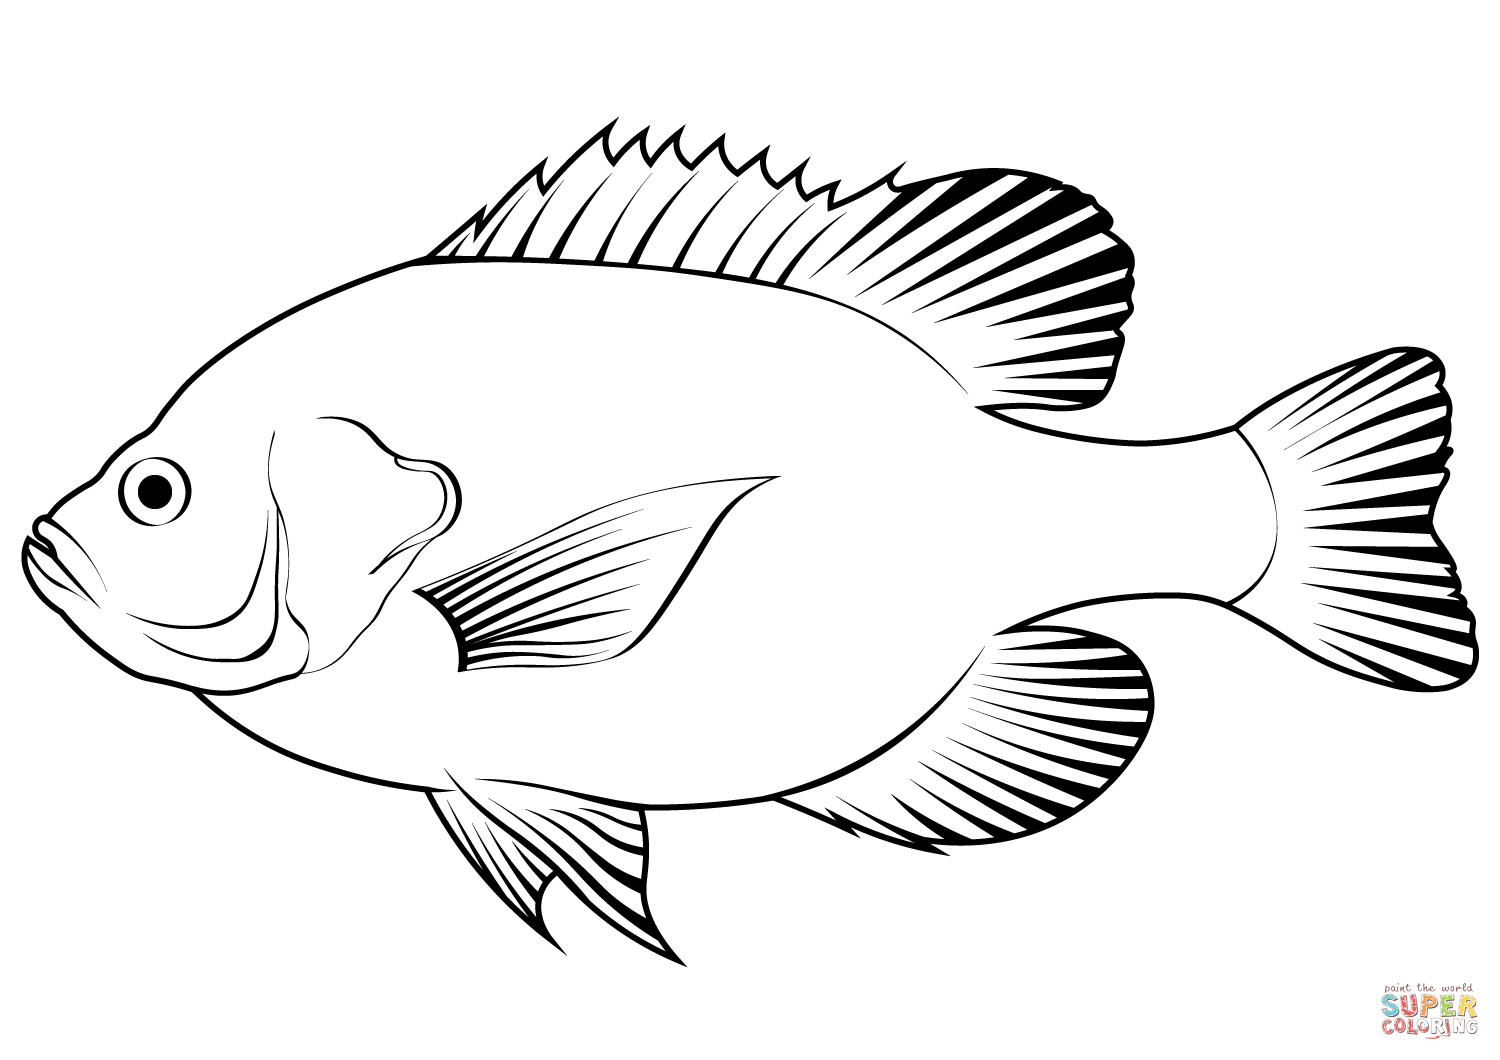 Redear sunfish lepomis microlophus coloring page free printable coloring pages